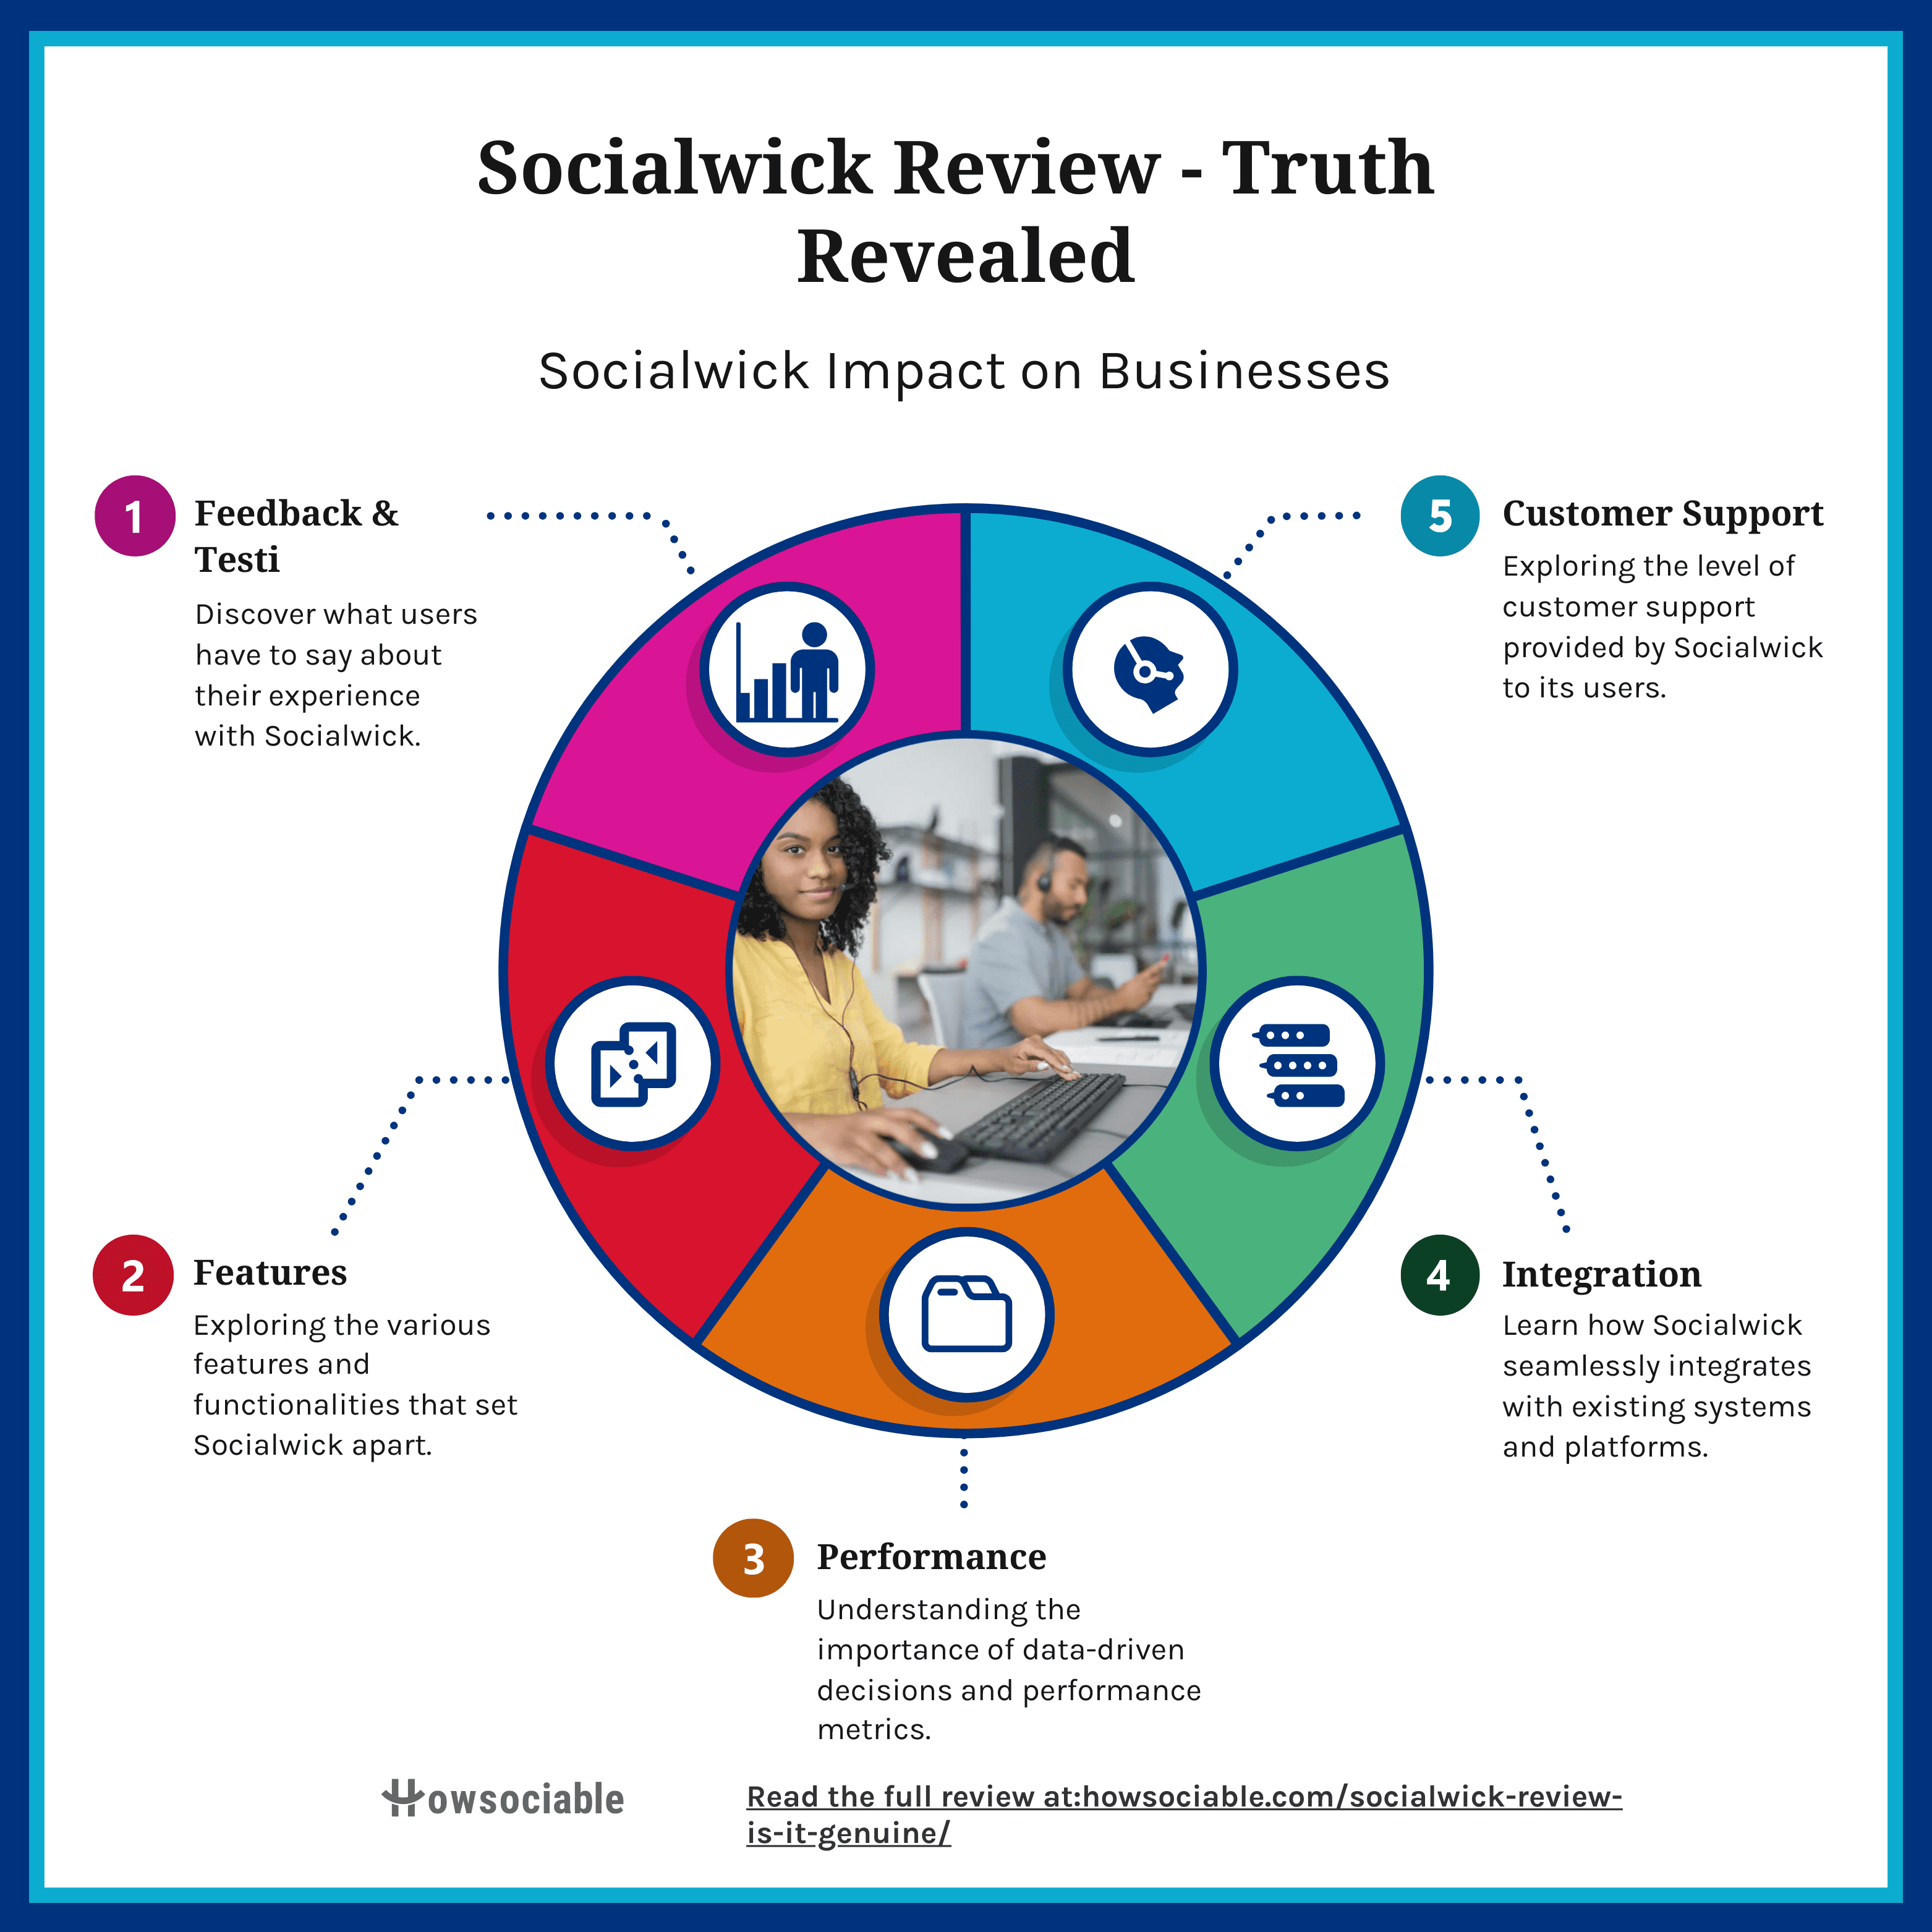 Socialwick Review - Truth Revealed